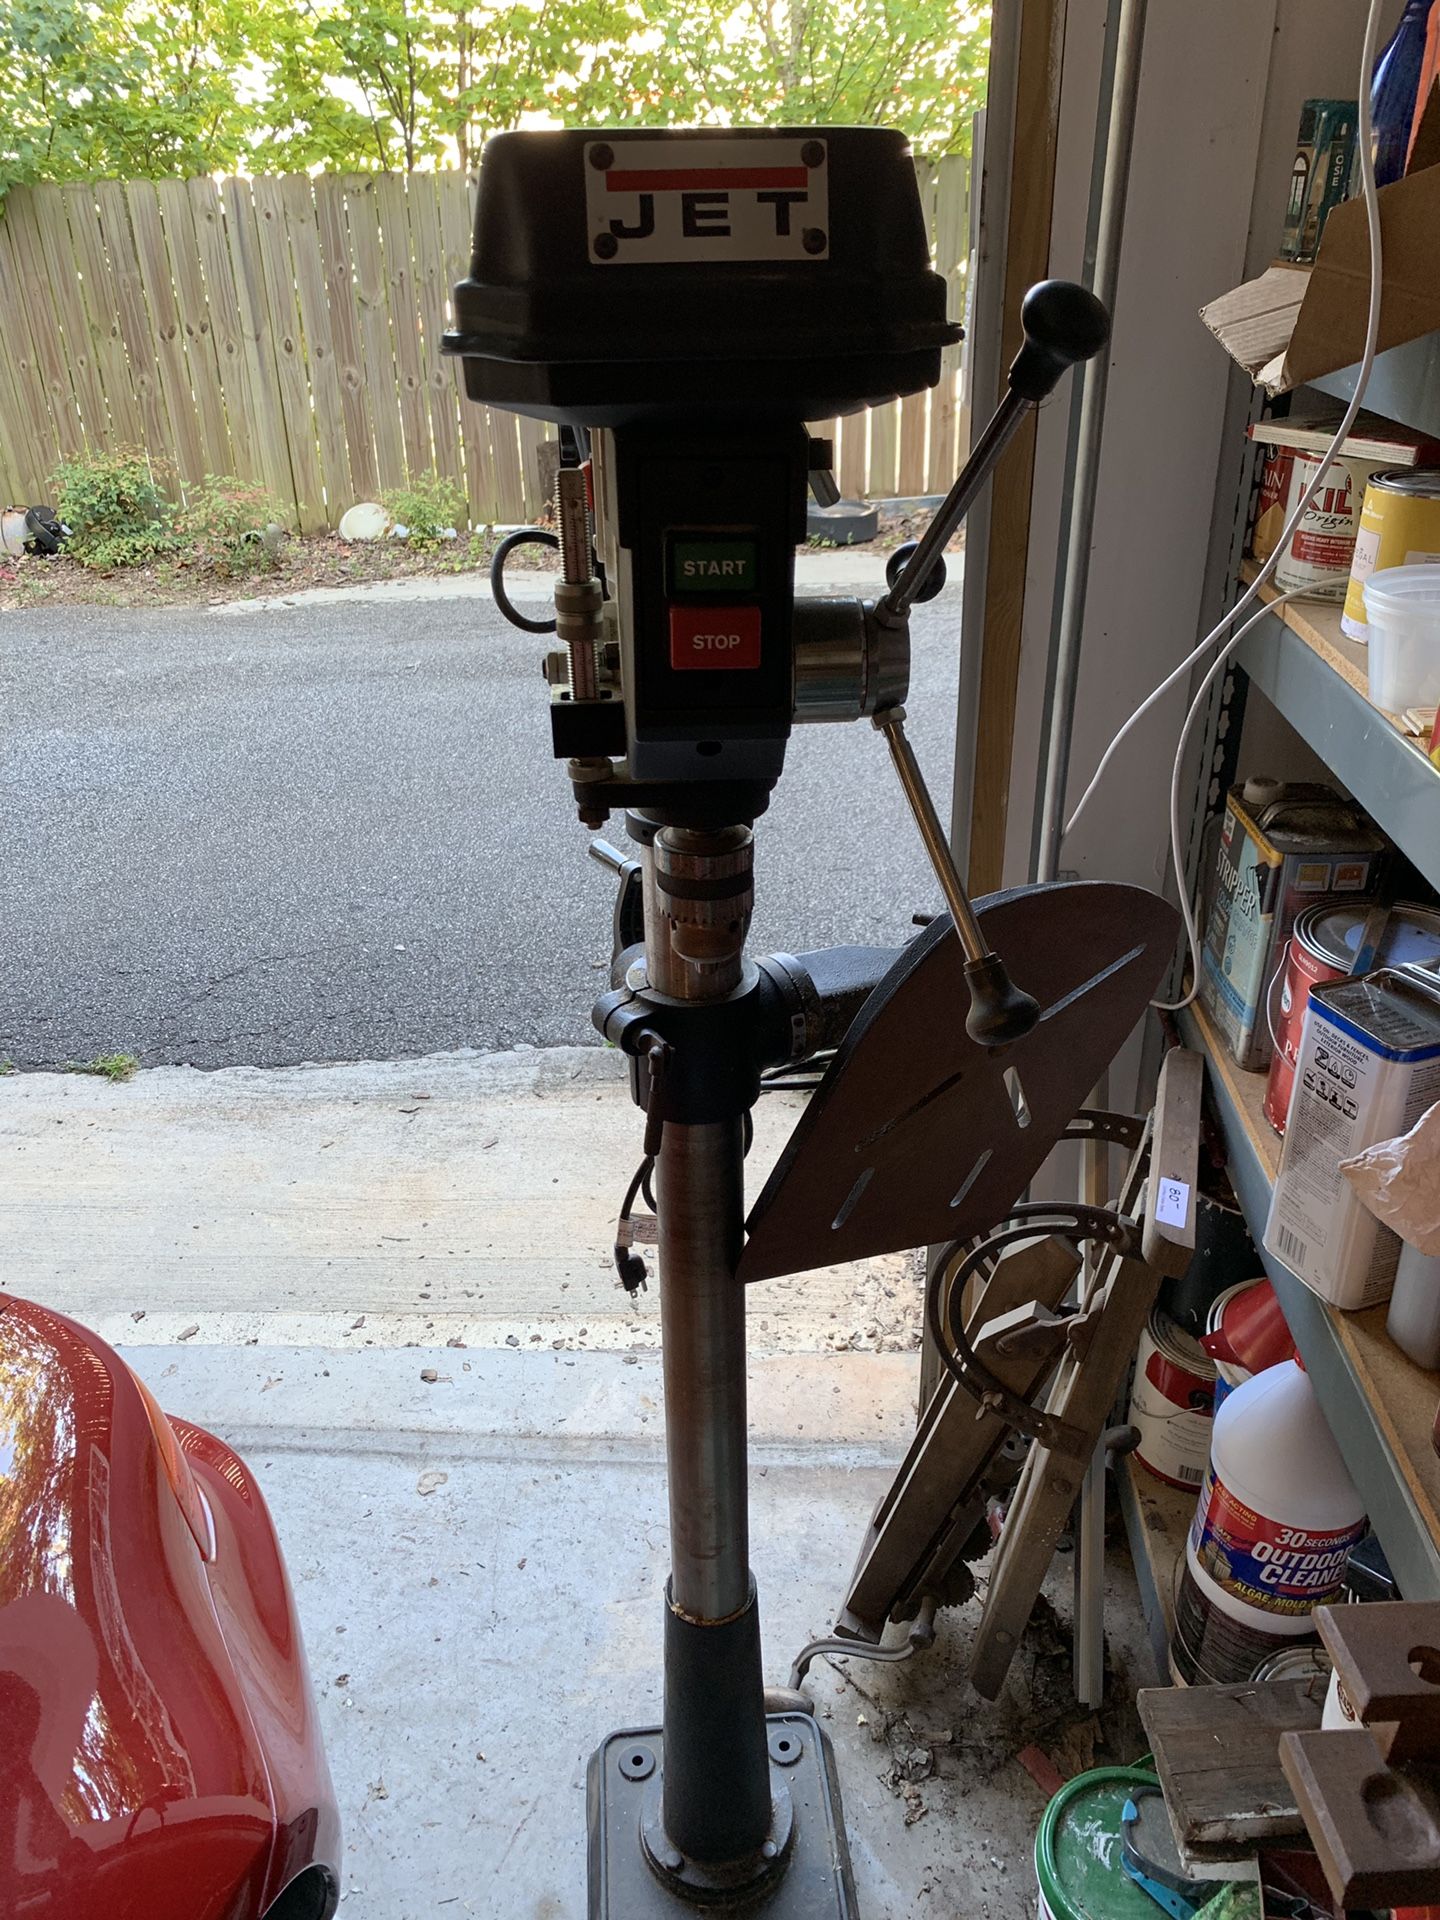 Jet Stand up drill press looks great